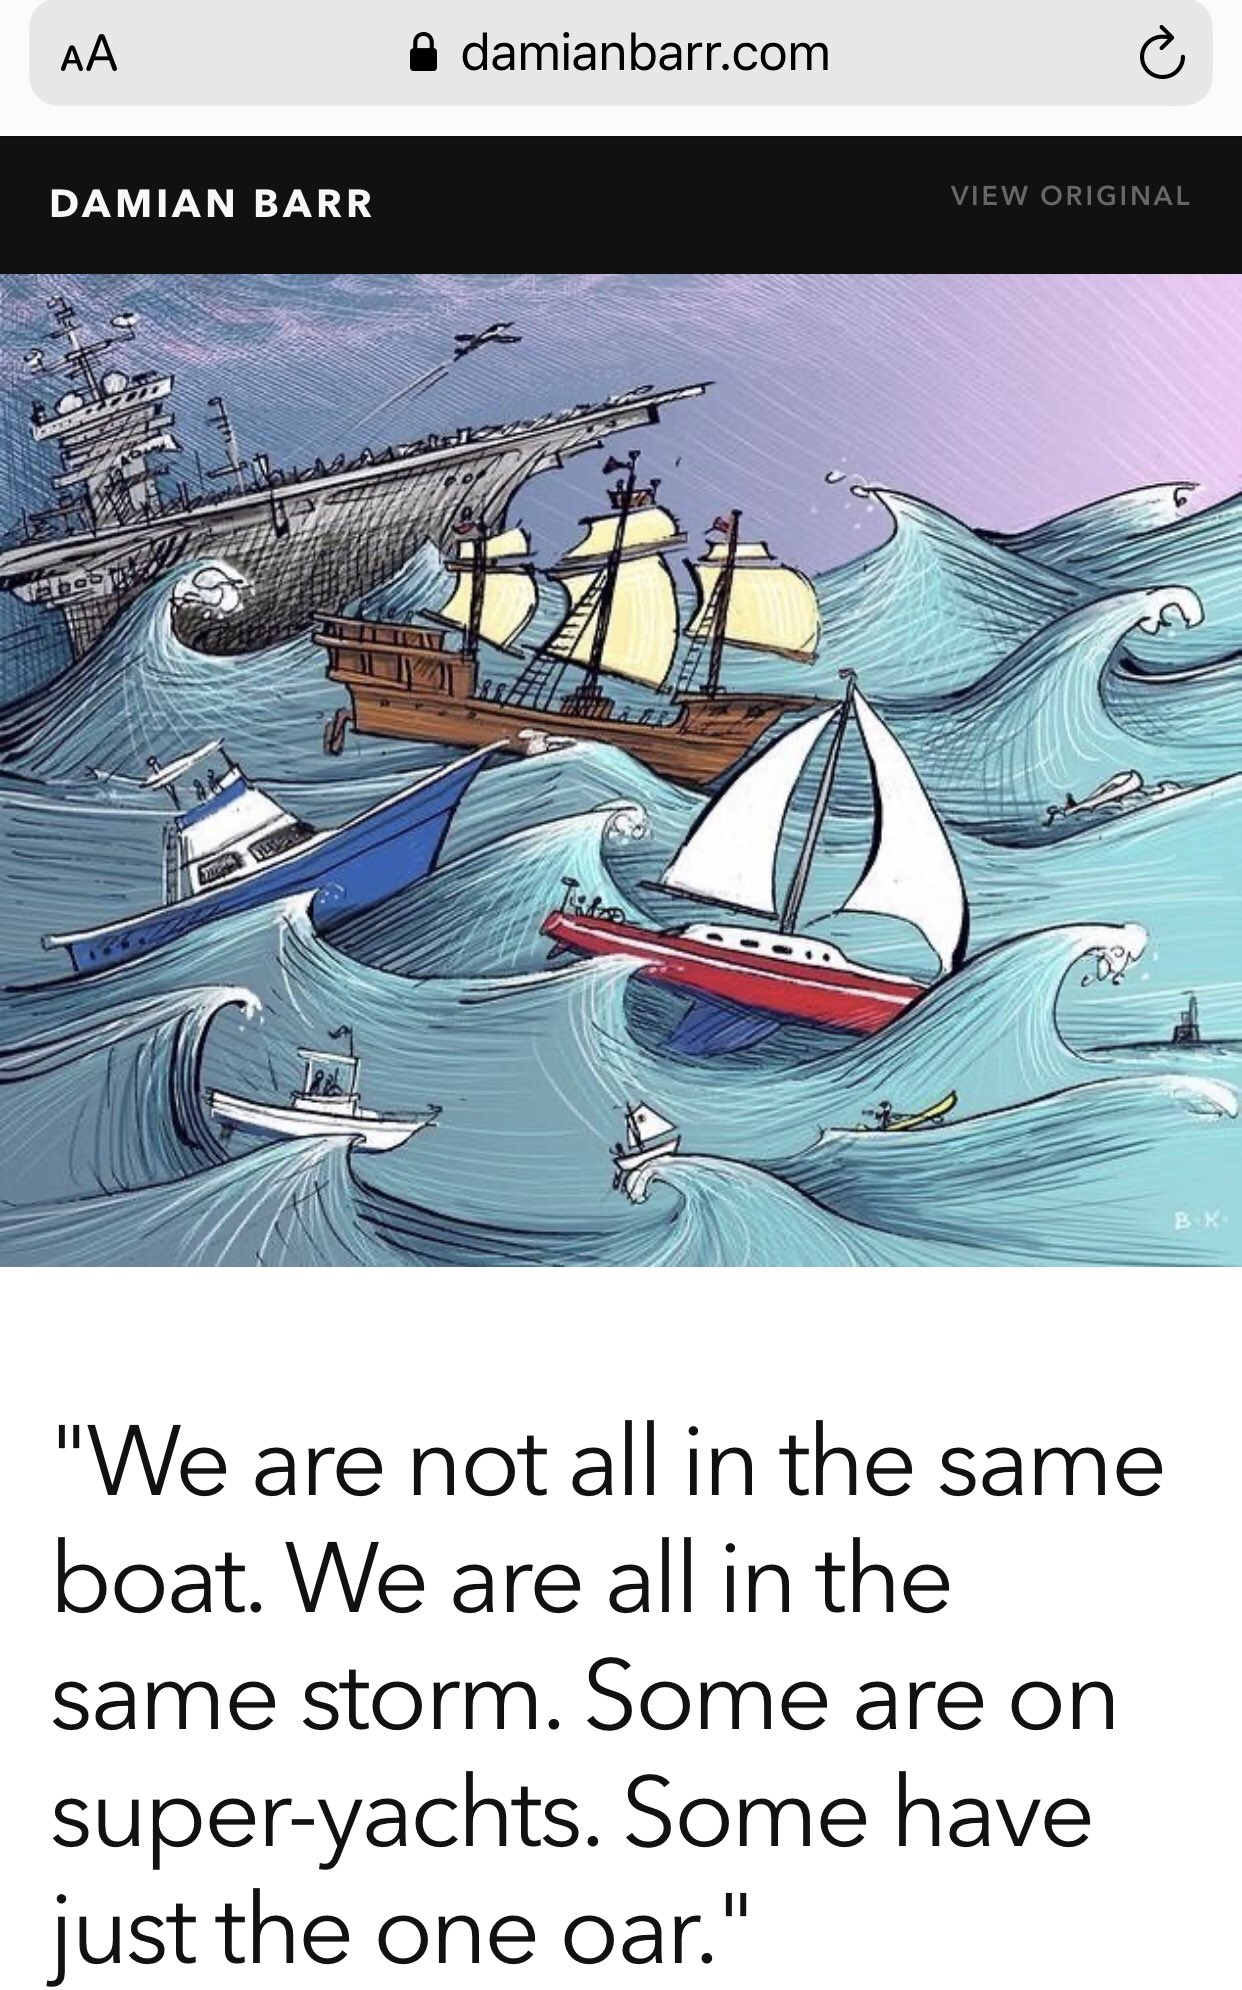 We're not all in the same boat, we're all in the same storm